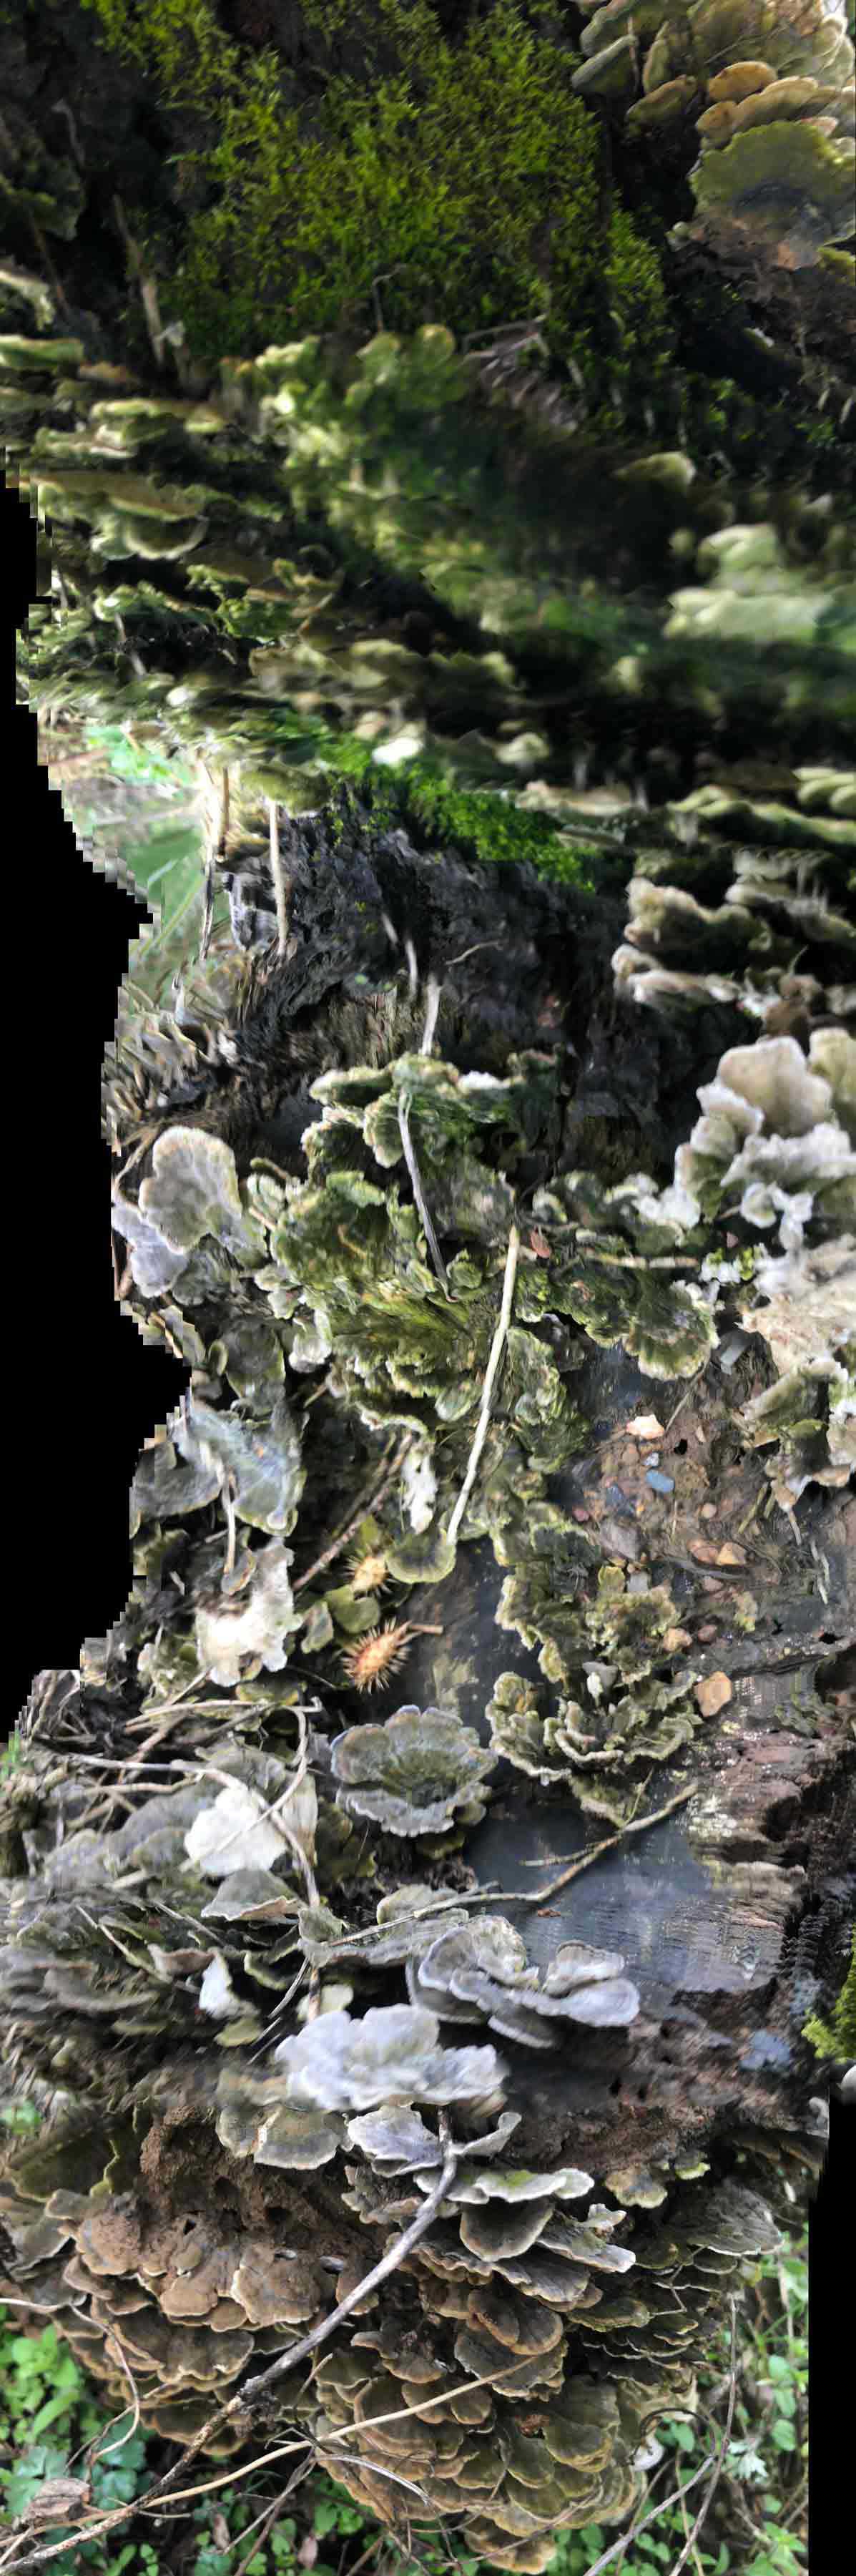 a fractured fungal architecture was discovered. The overall architecture shape is like a twisted column and is covered by some green mosses. 